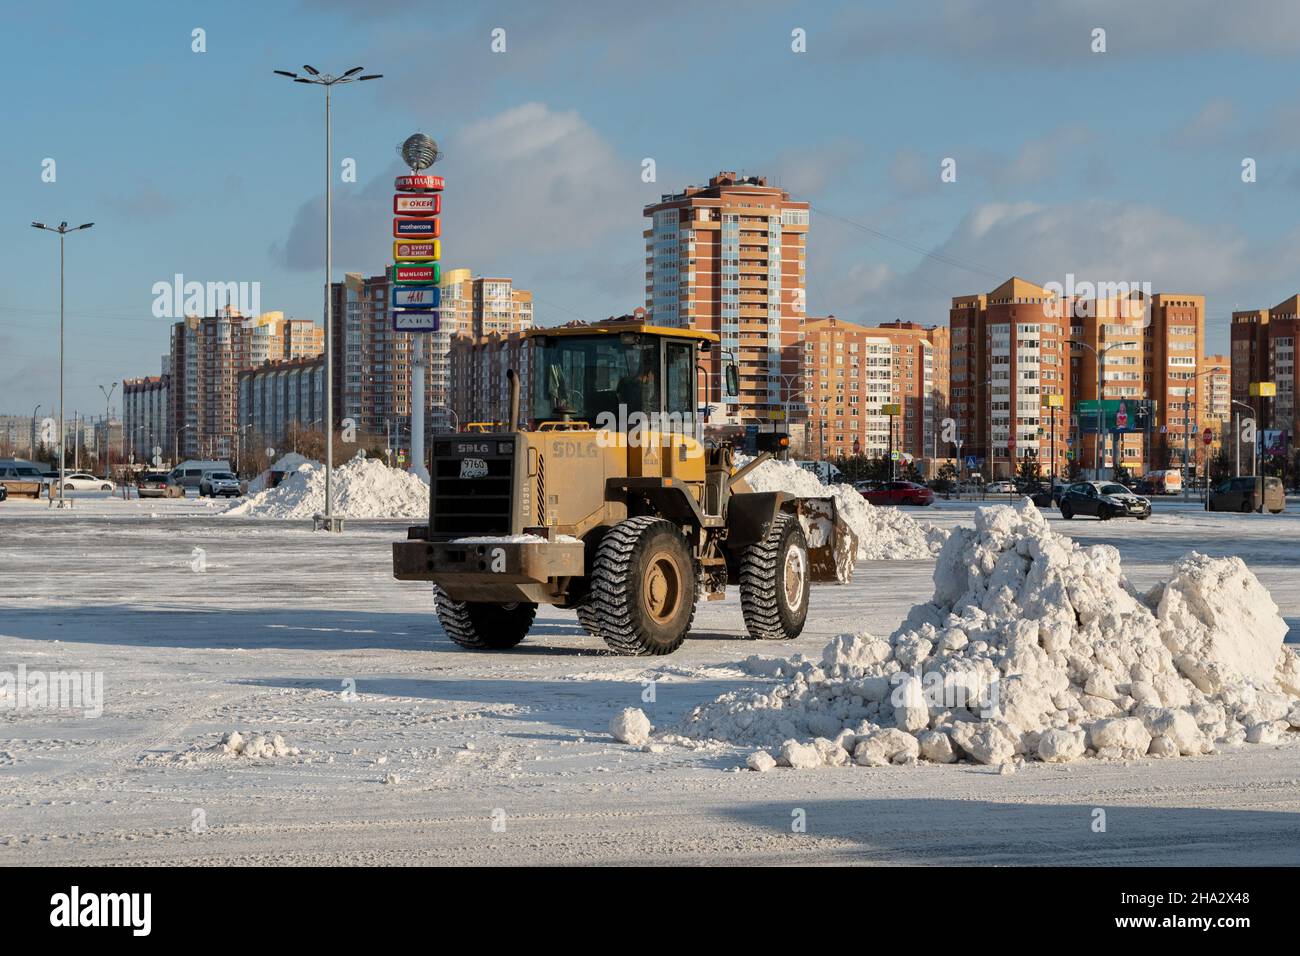 A bucket loader removes snow from snowdrifts in a city square after a snowfall against the backdrop of residential buildings on a sunny day. Stock Photo